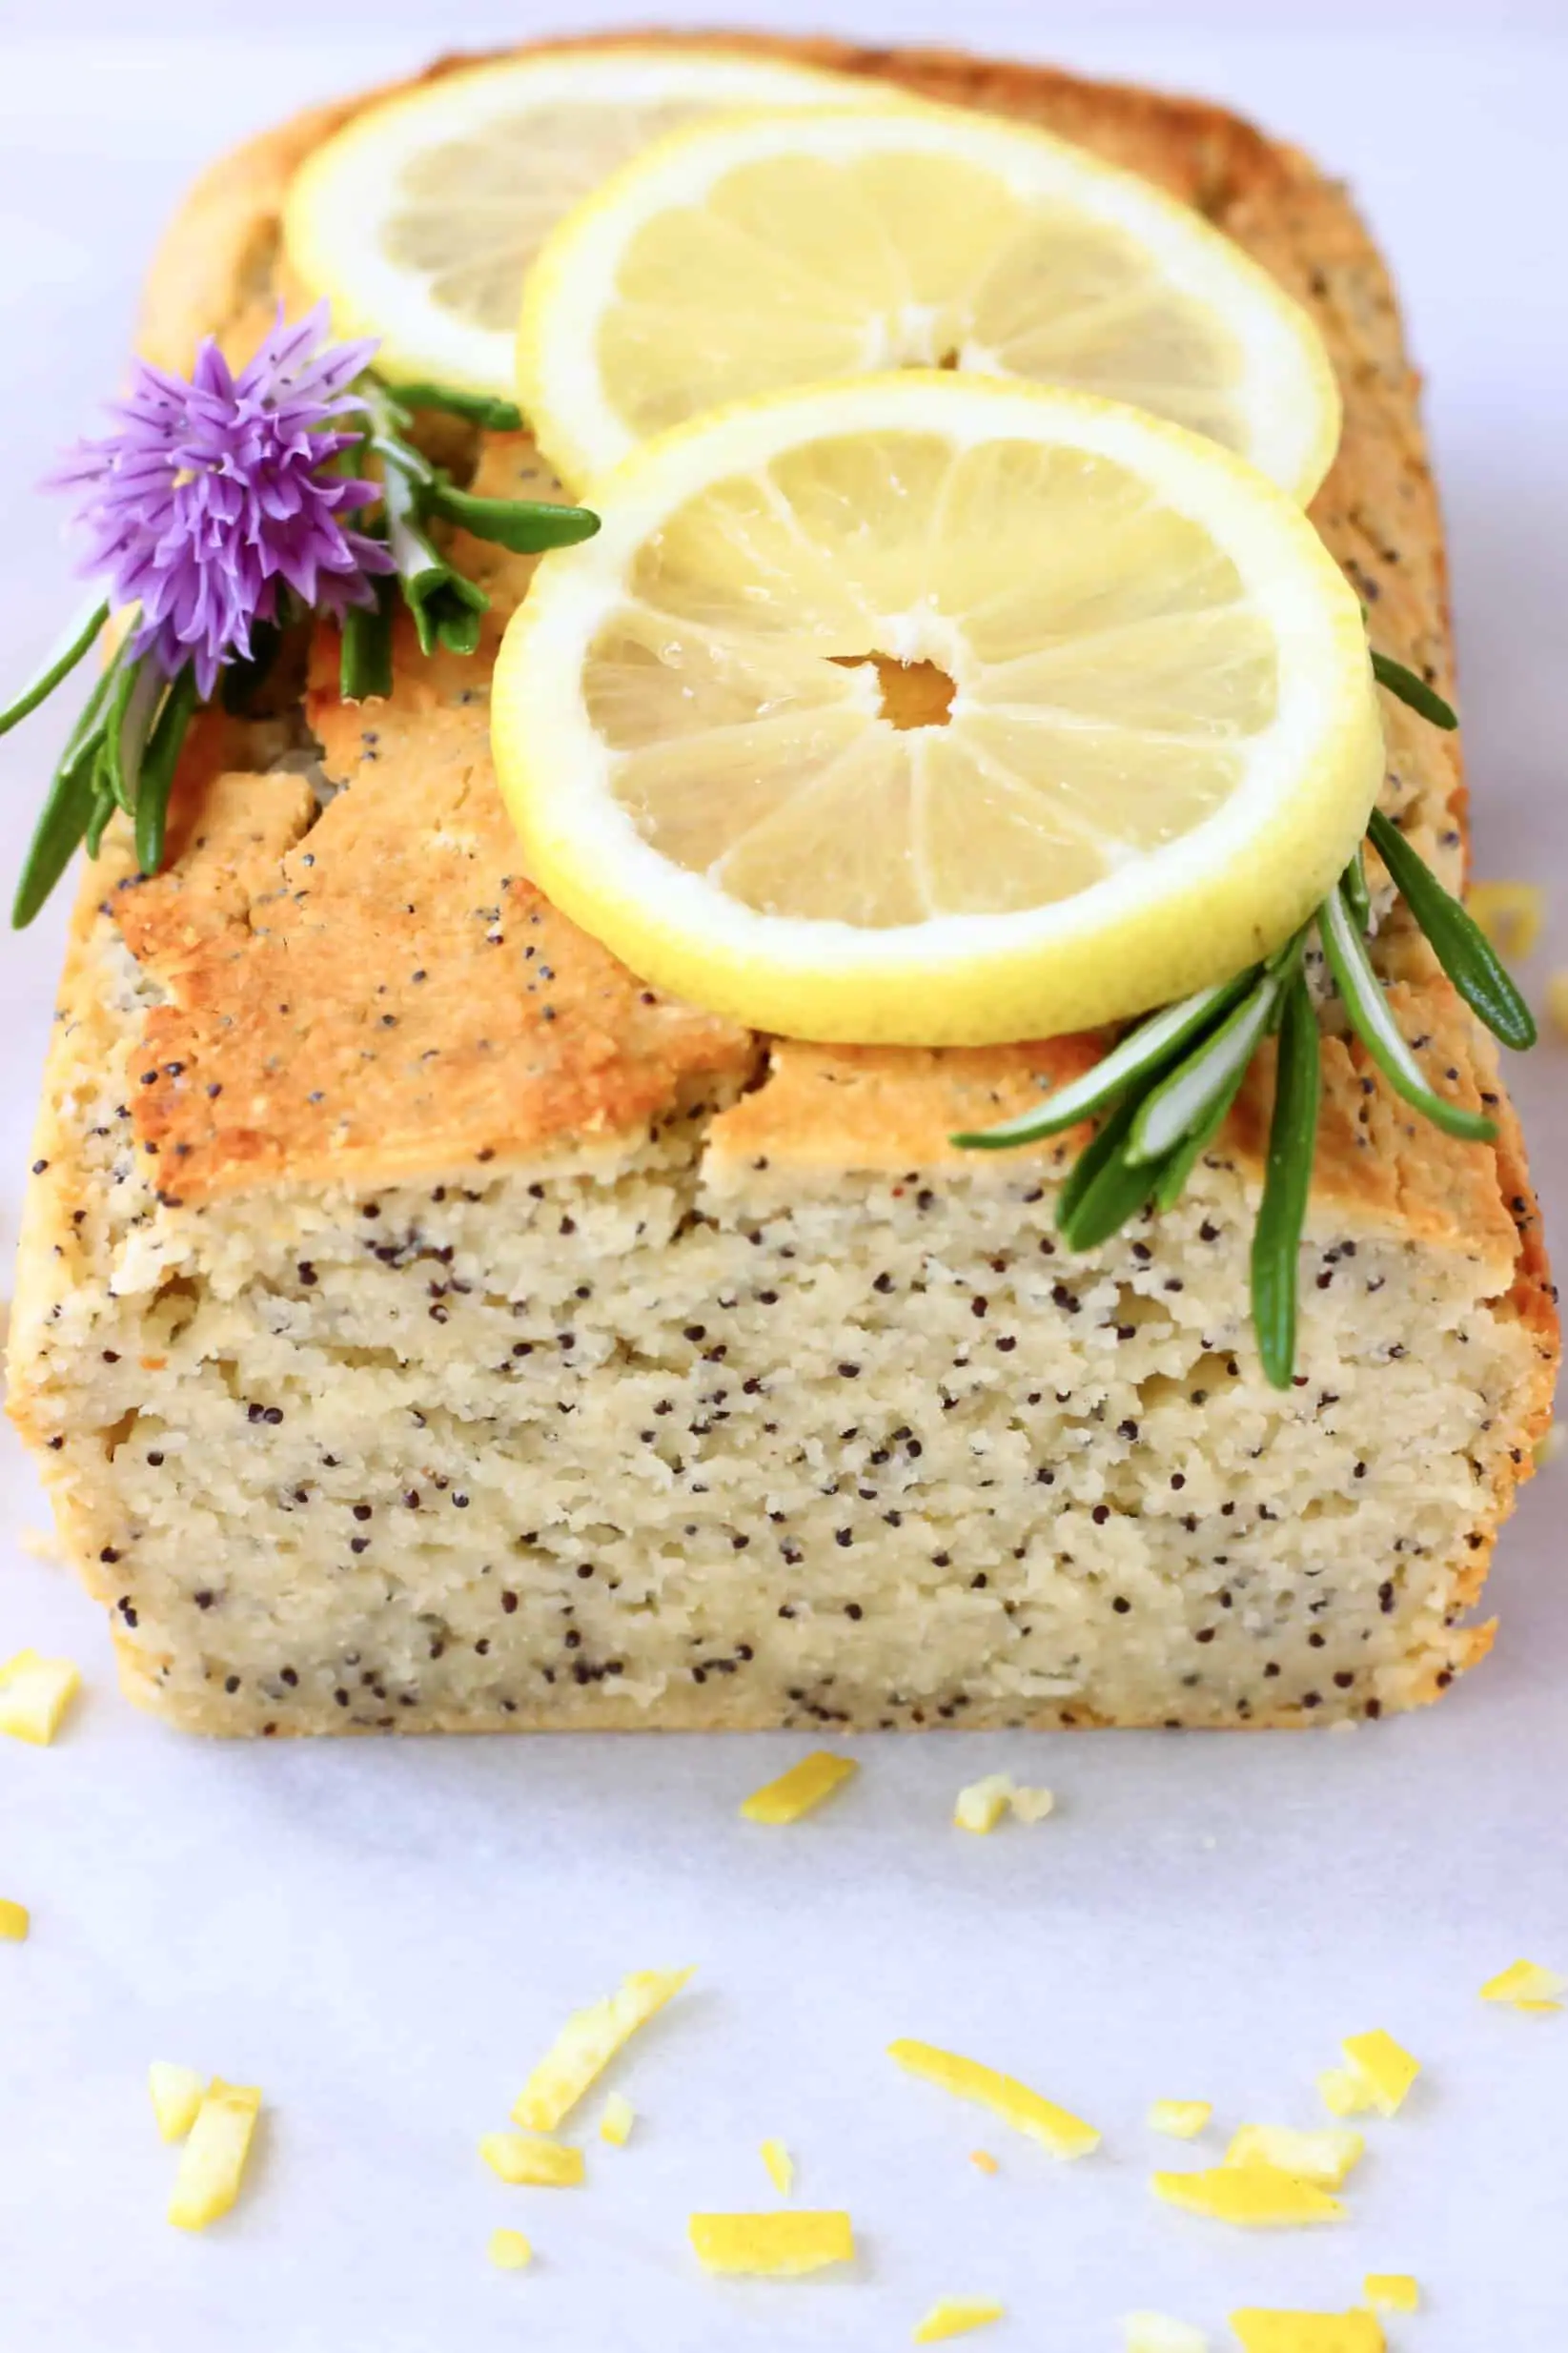 A loaf of gluten-free vegan lemon poppy seed bread topped with lemon slices